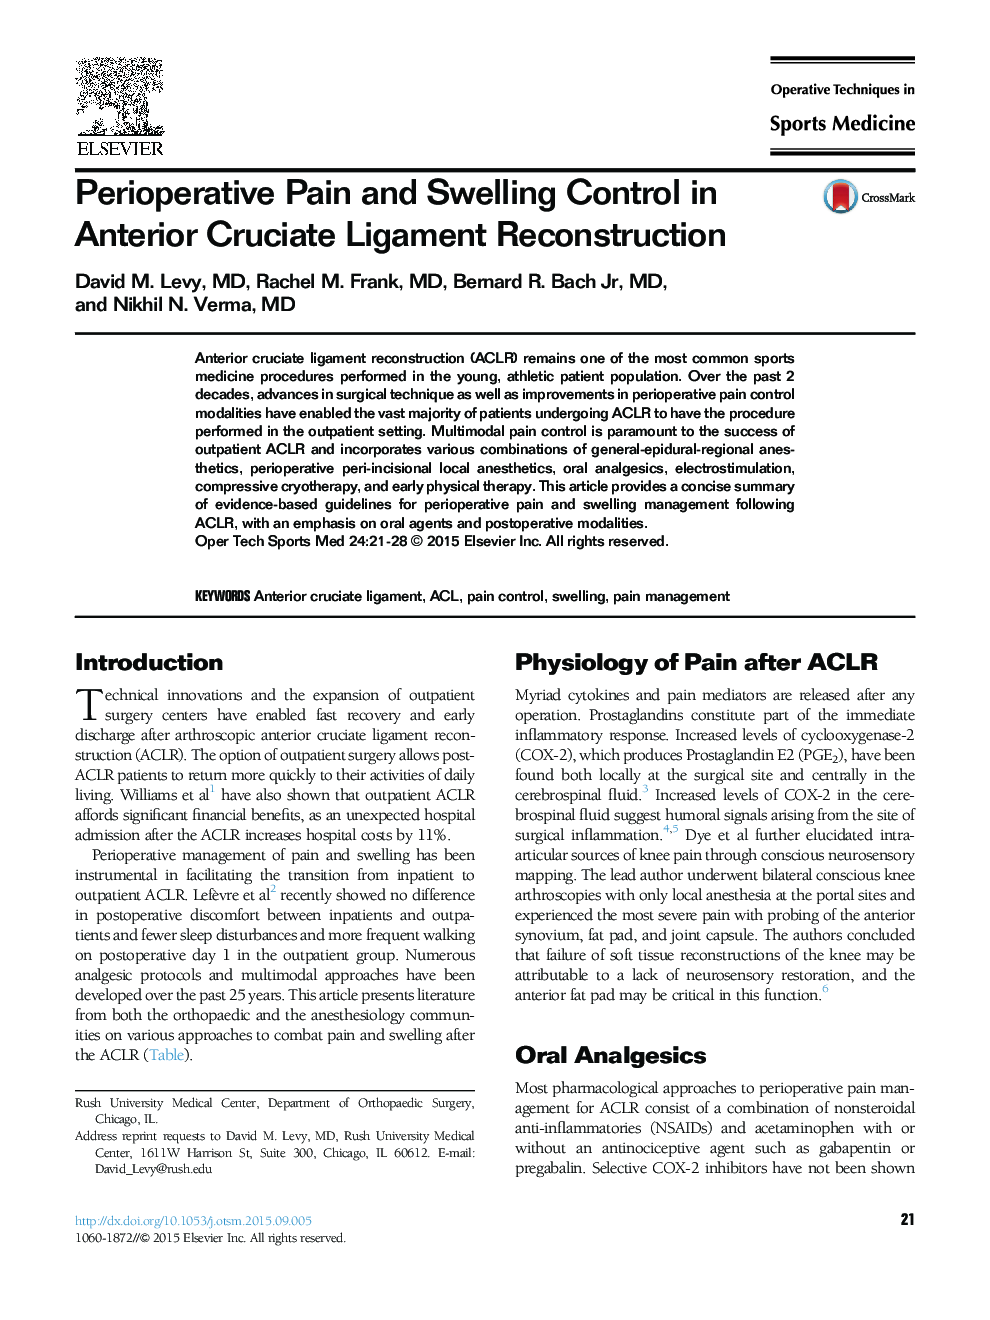 Perioperative Pain and Swelling Control in Anterior Cruciate Ligament Reconstruction